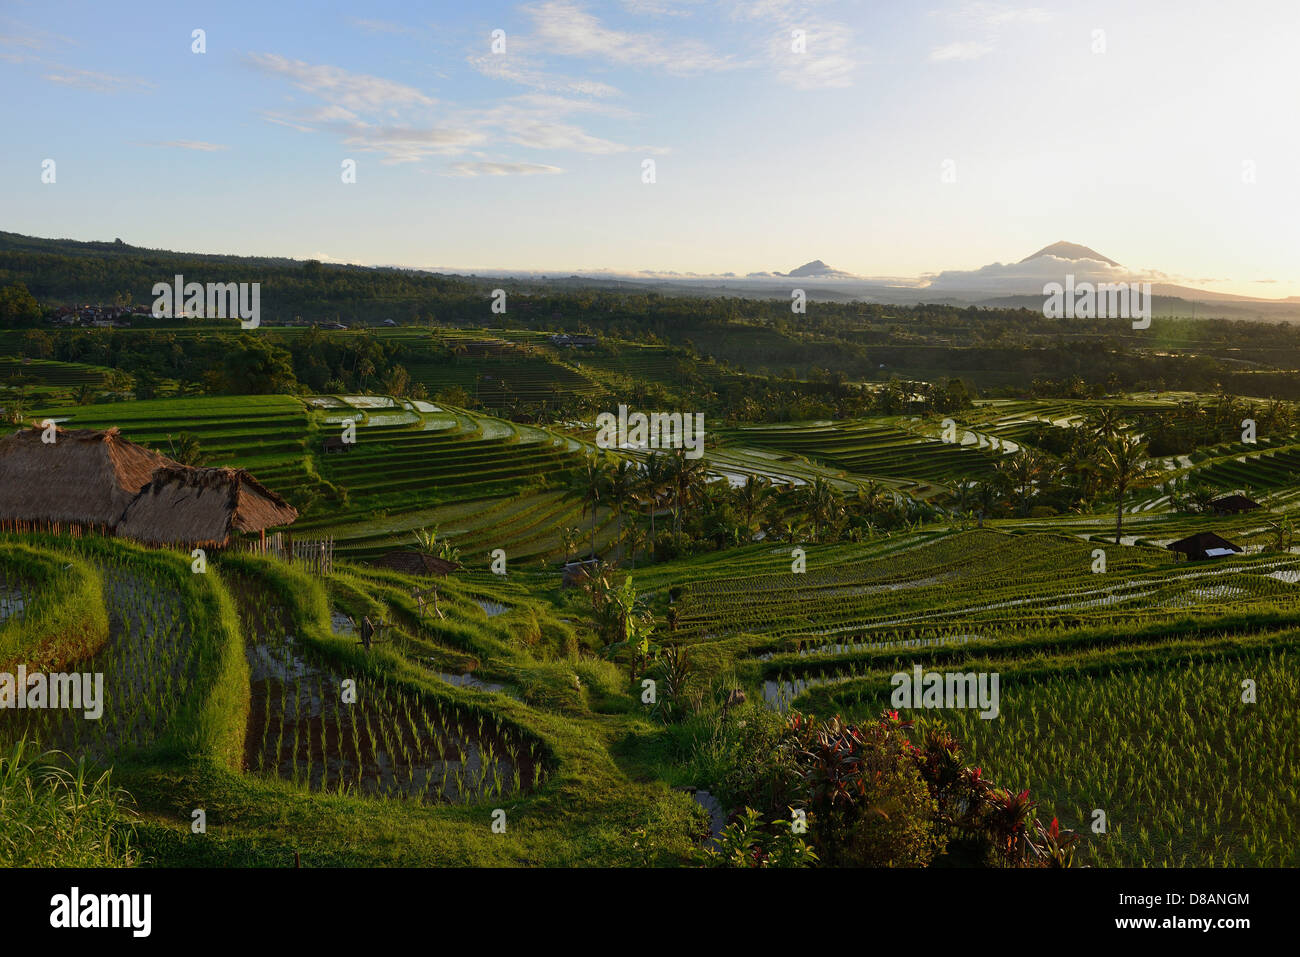 Indonesia, Bali, rice fields in terrace near Jatiluwith, in the background the Agung volcano Stock Photo